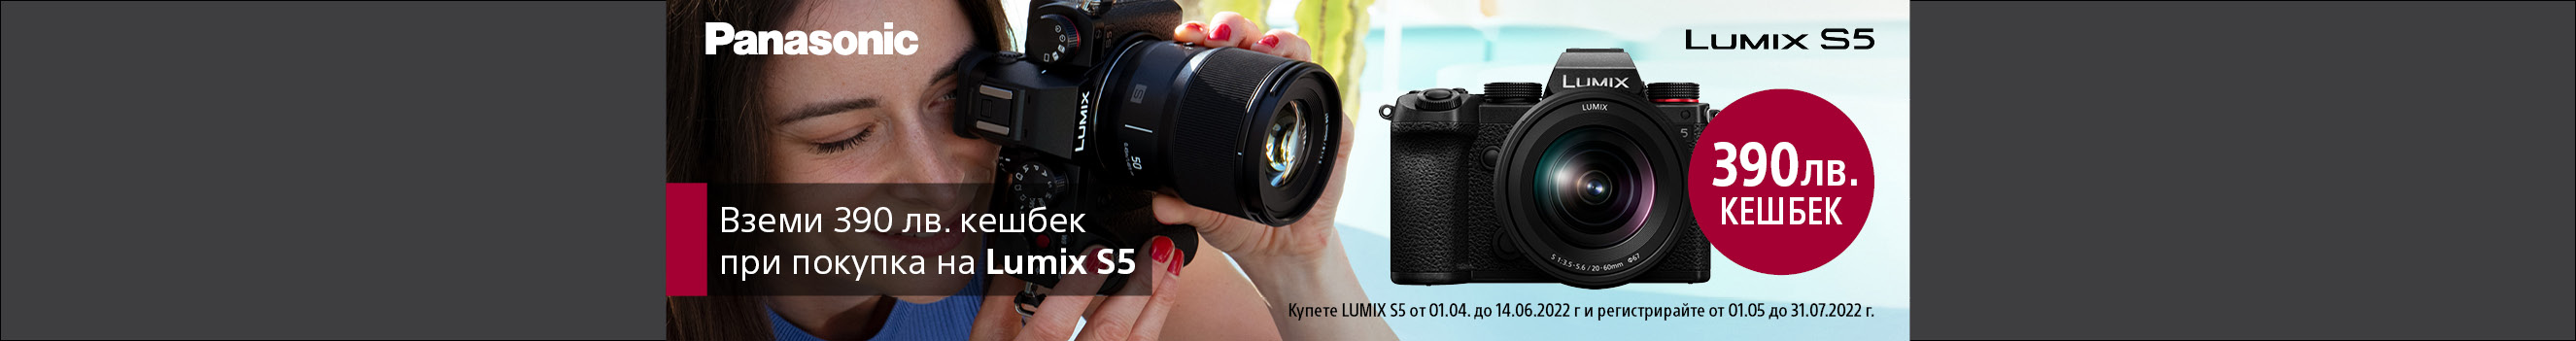  Panasonic Lumix S5 camera with 200 euro cashback in PhotoSynthesis stores